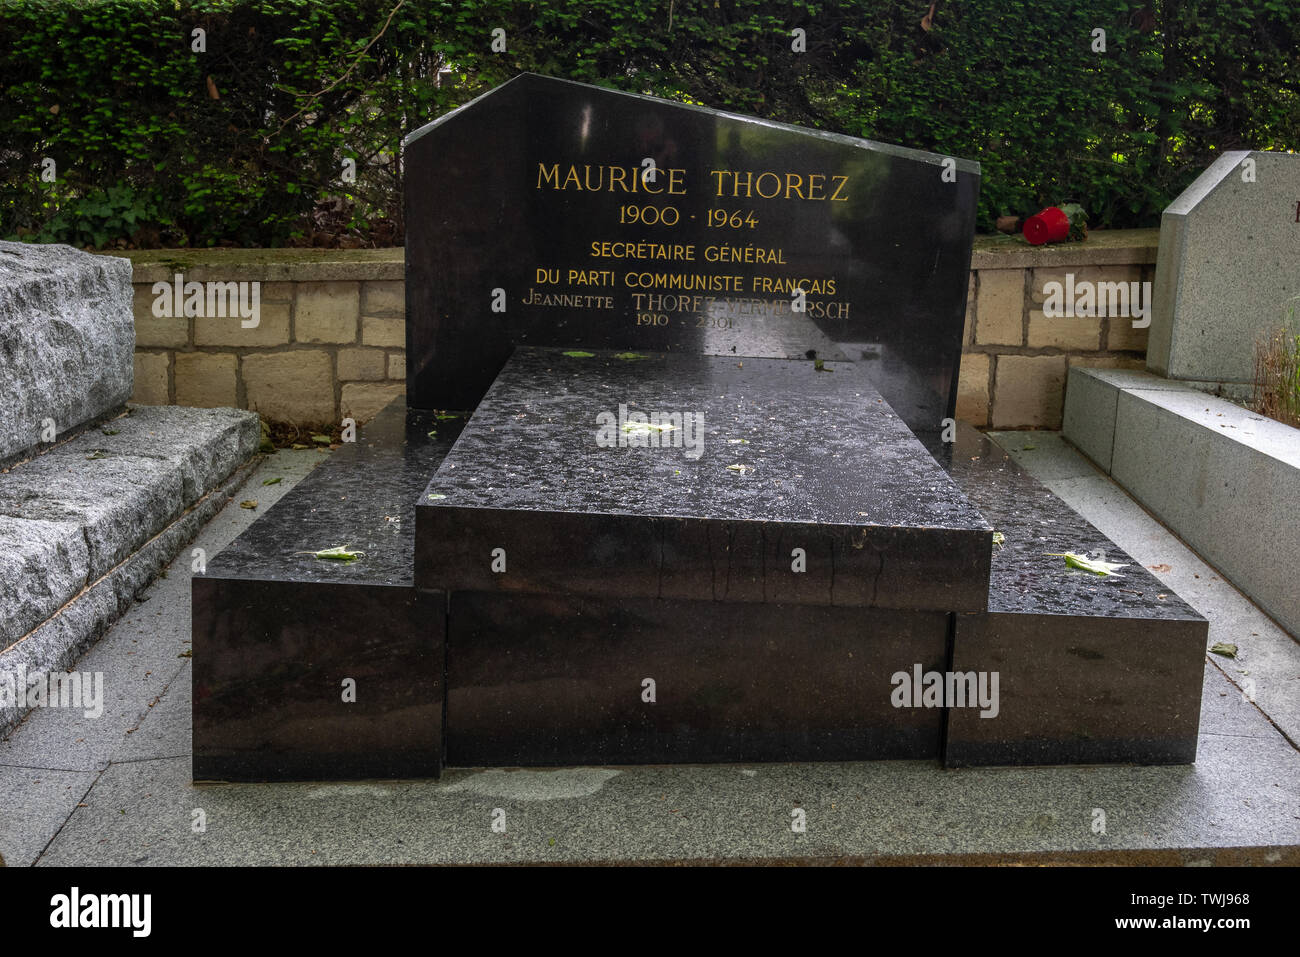 Paris, France - May 28, 2019: Maurice Thorez tomb at the Père Lachaise cemetery Stock Photo